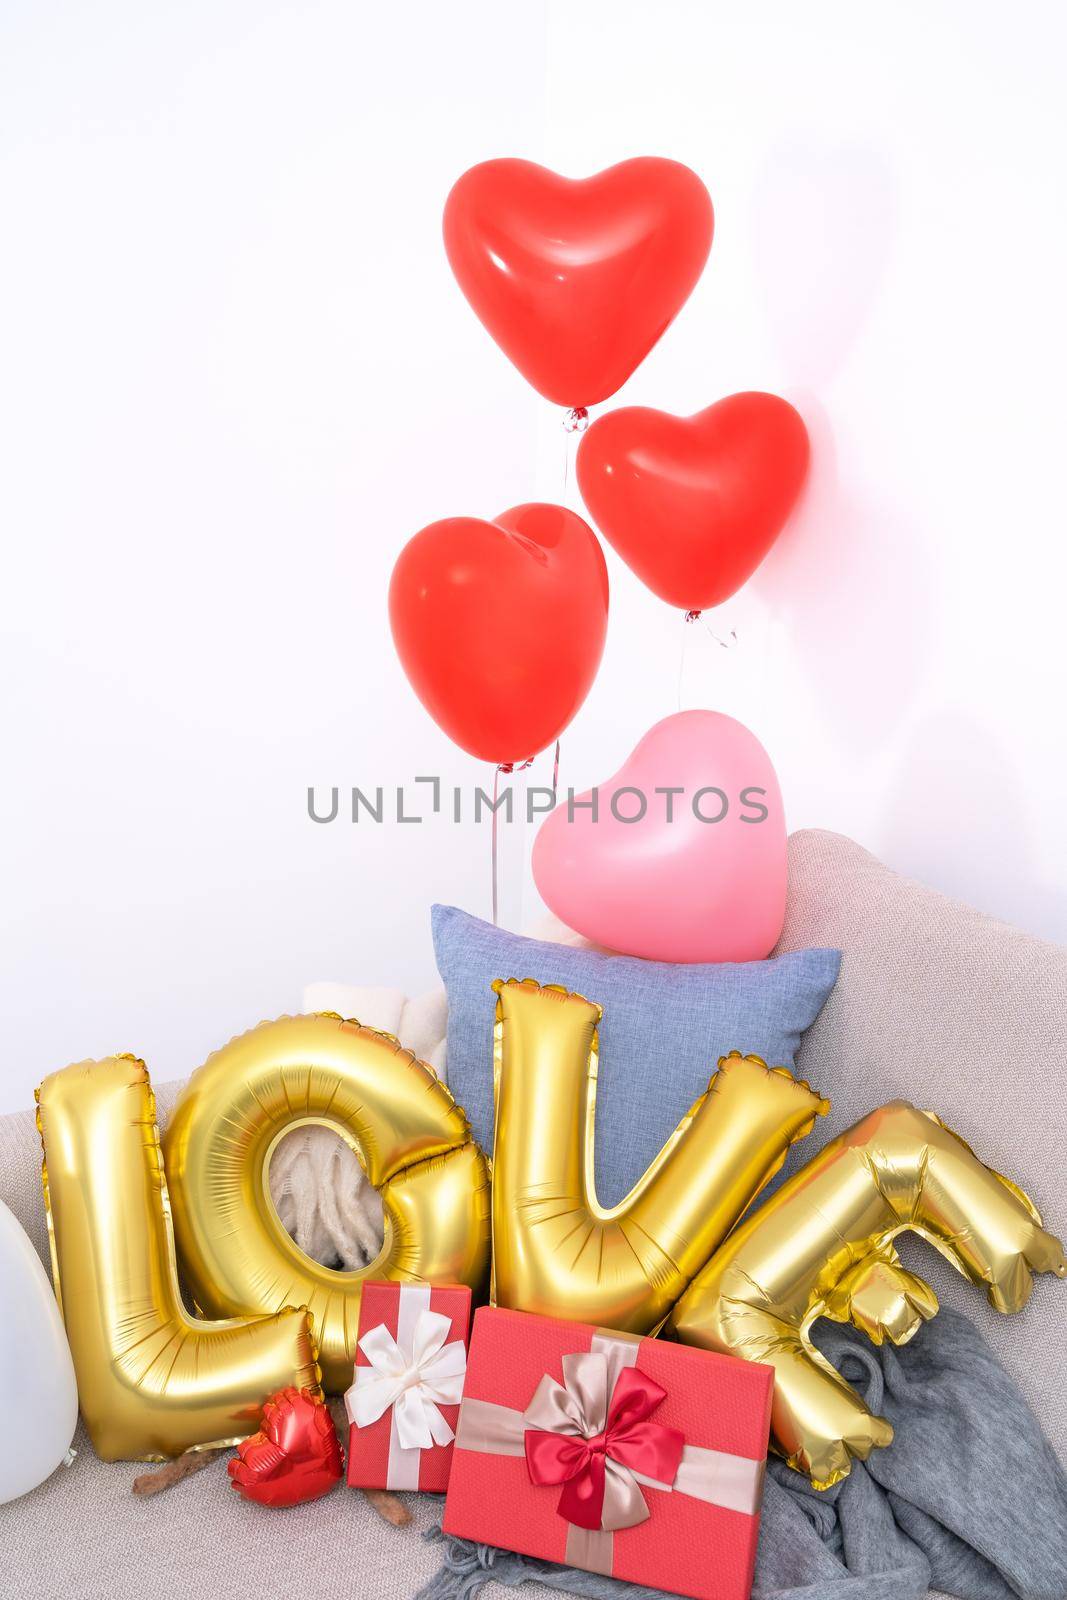 Foil love balloons and gifts on a sofa with white wall in background for Valentine's day, Mother's day surprise design concept.